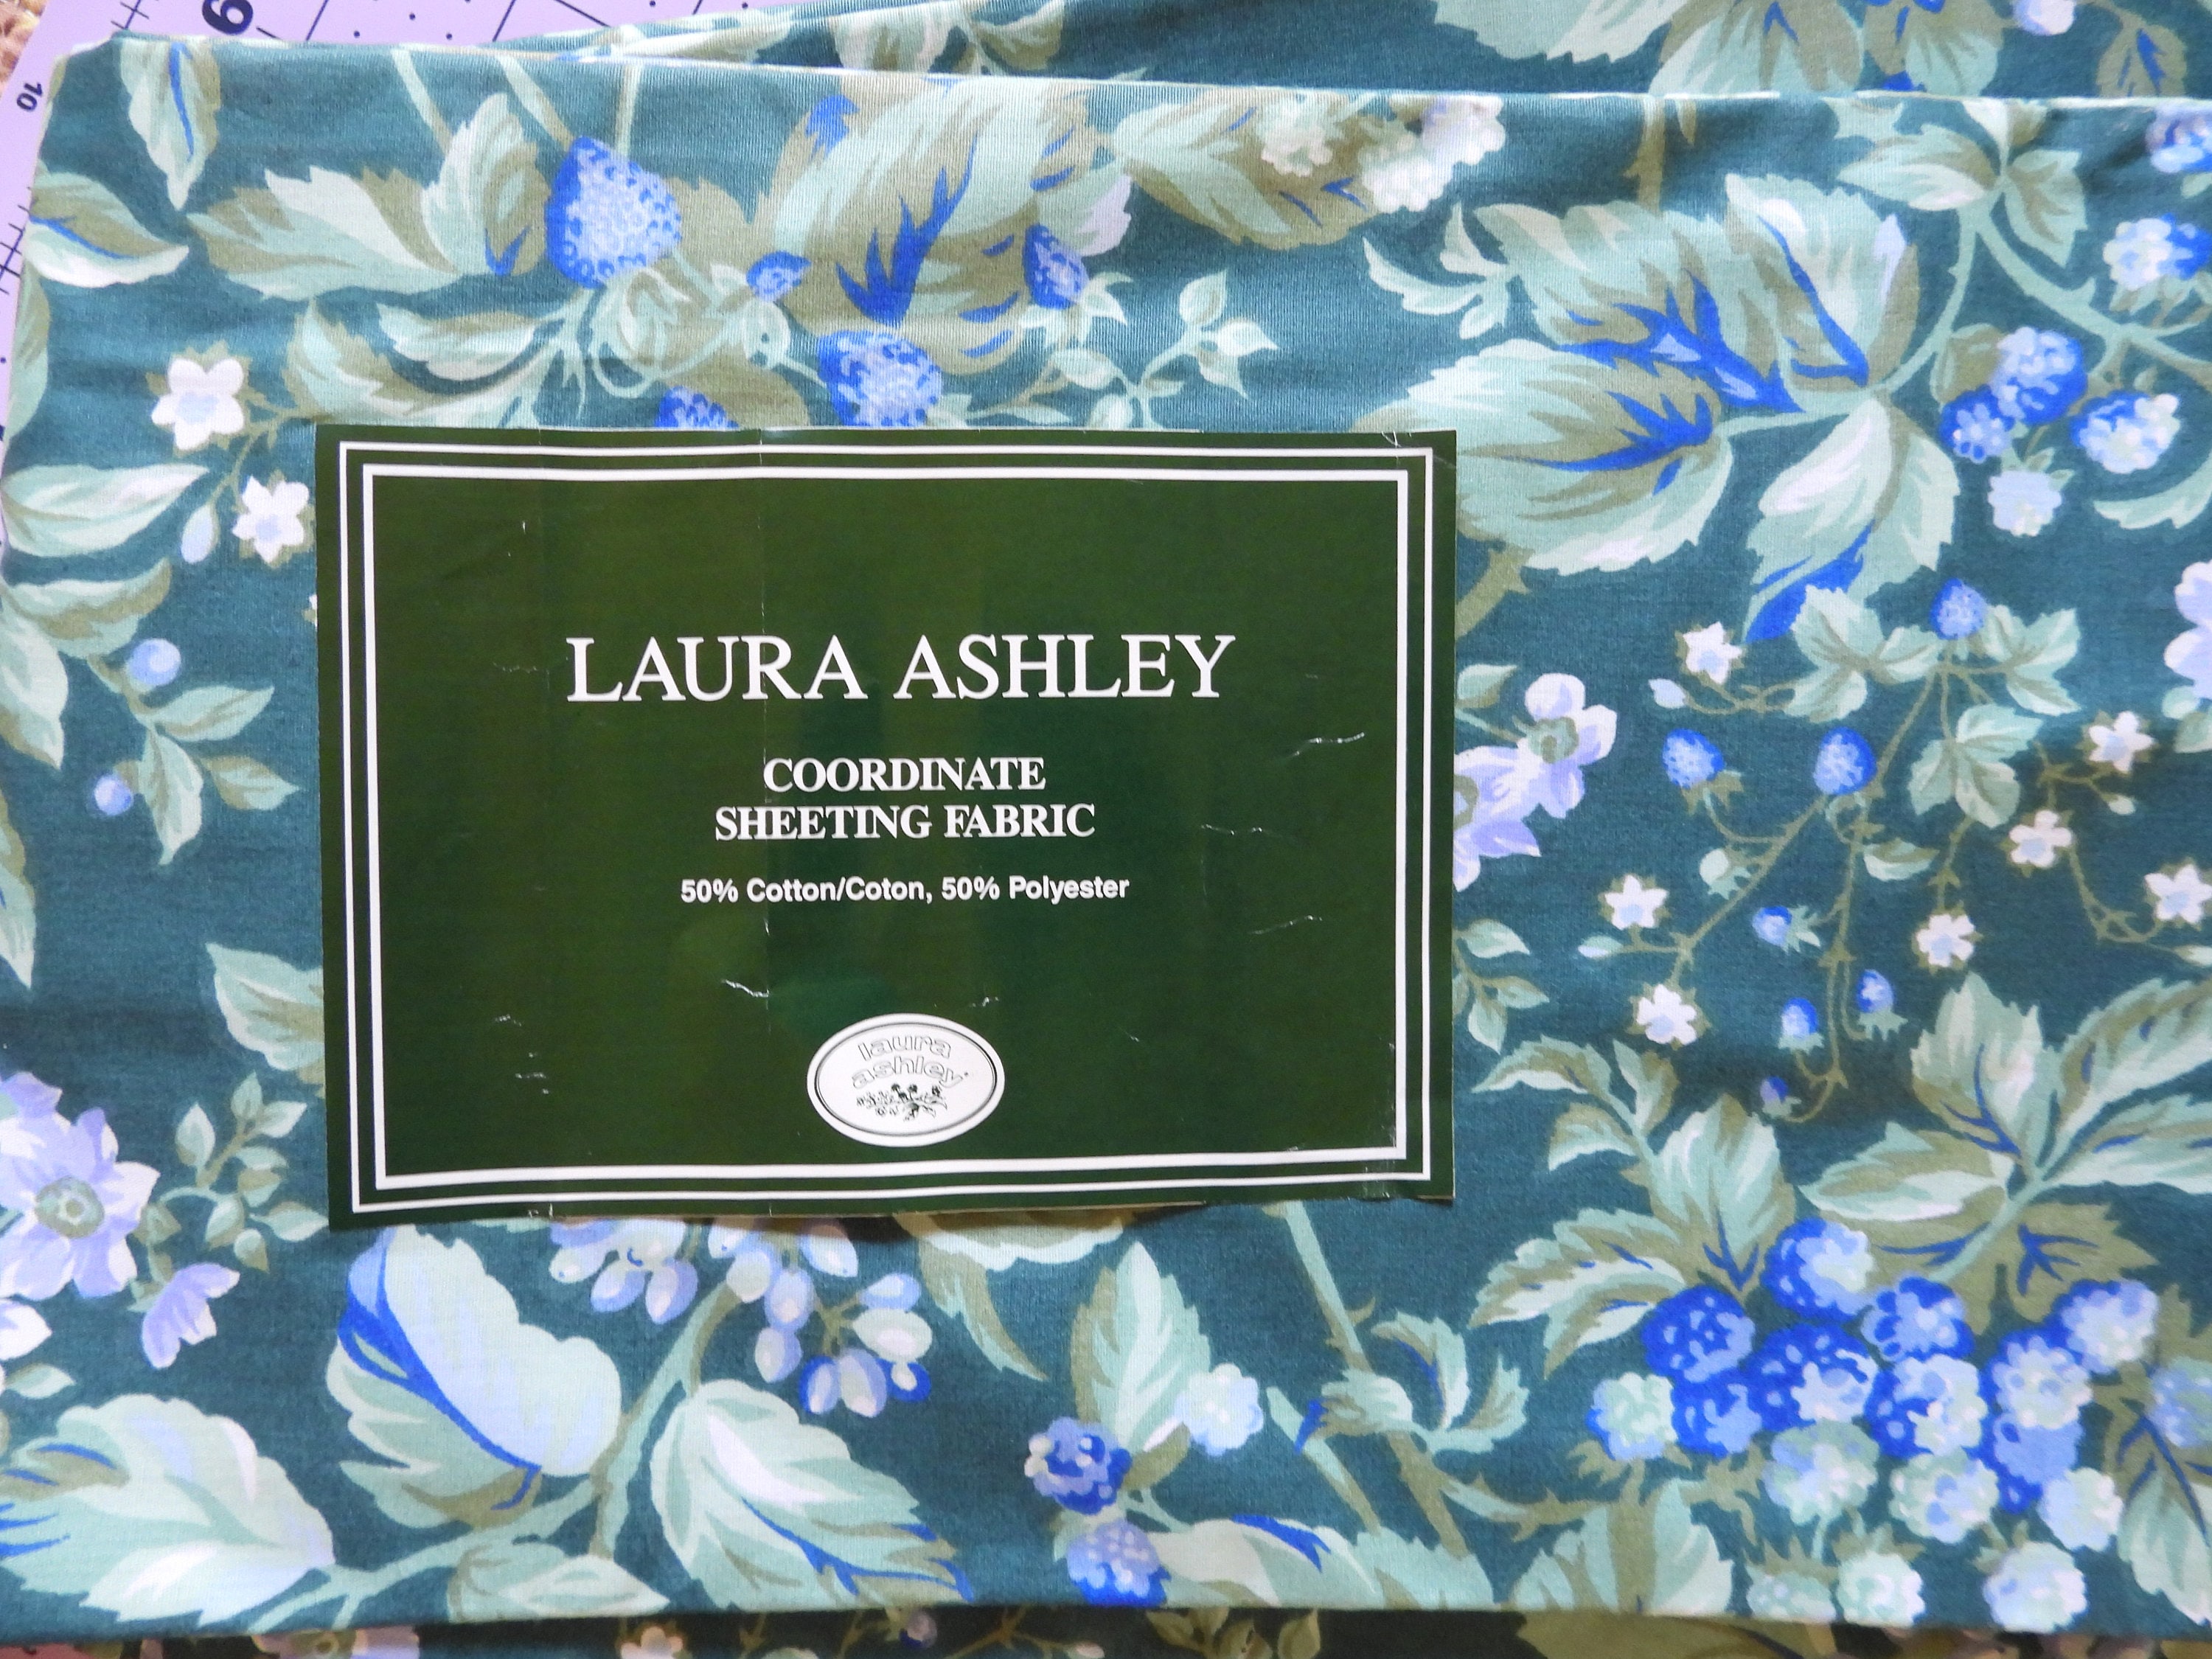 Laura Ashley bramble Berry Coordinate Sheeting Fabric / 106 Inches